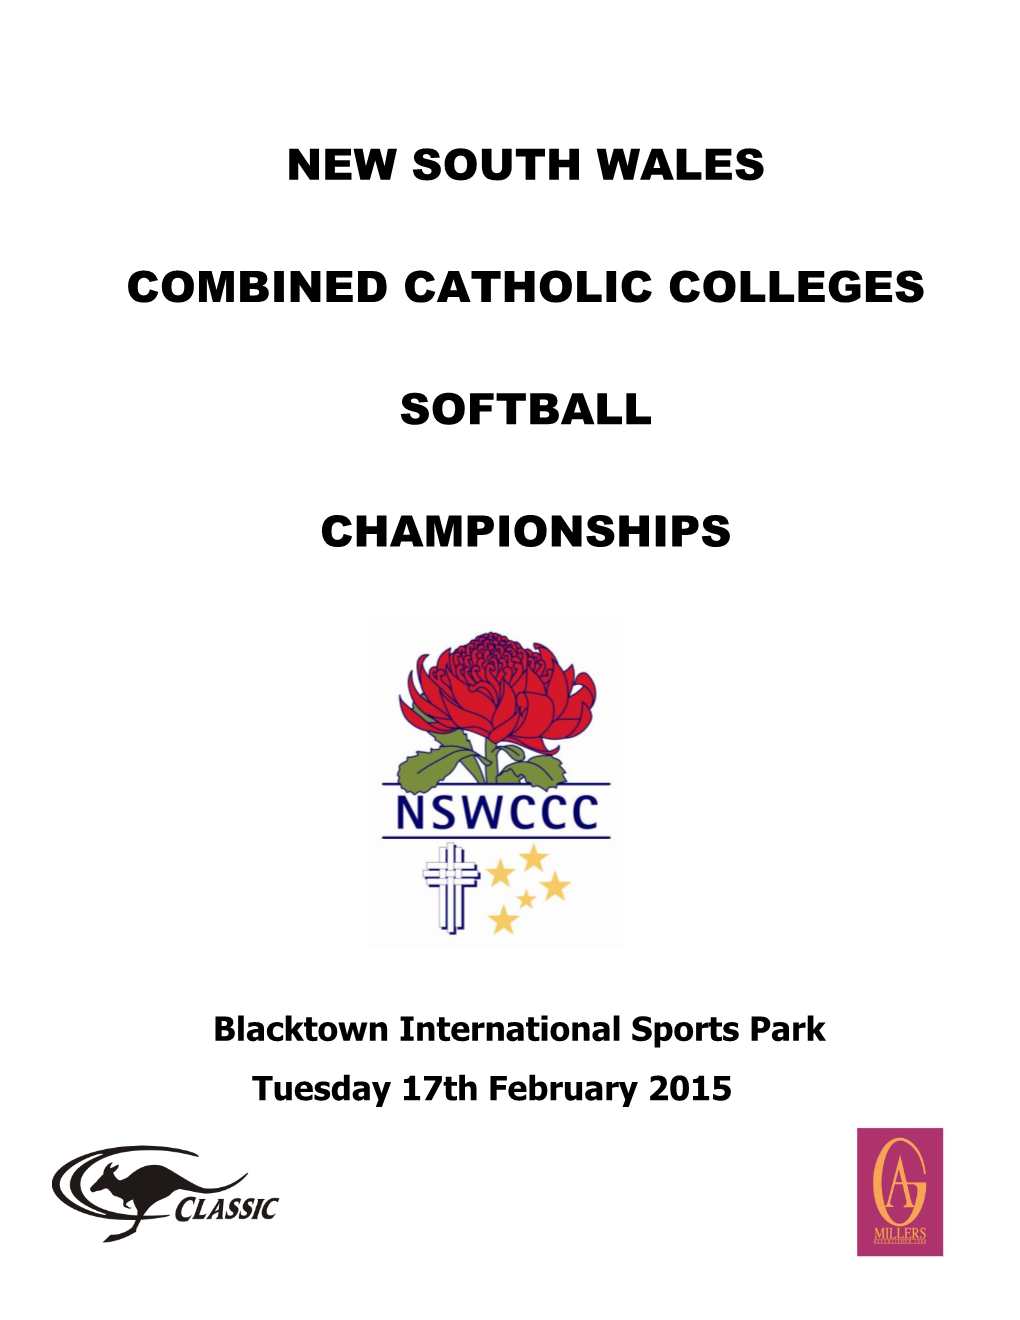 New South Wales Combined Catholic Colleges Softball